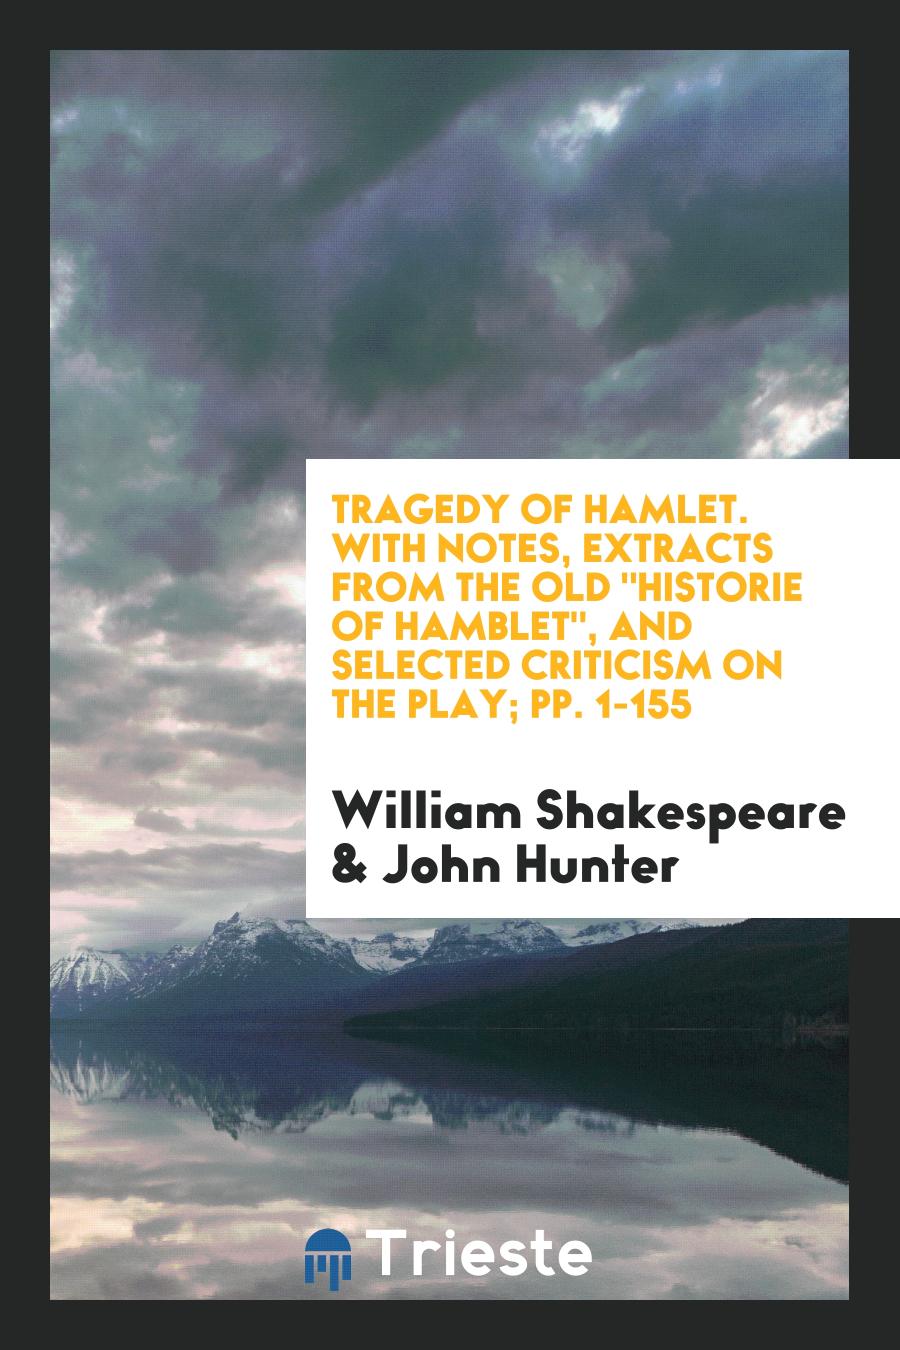 Tragedy of Hamlet. With Notes, Extracts from the Old "Historie of Hamblet", and Selected Criticism on the Play; pp. 1-155